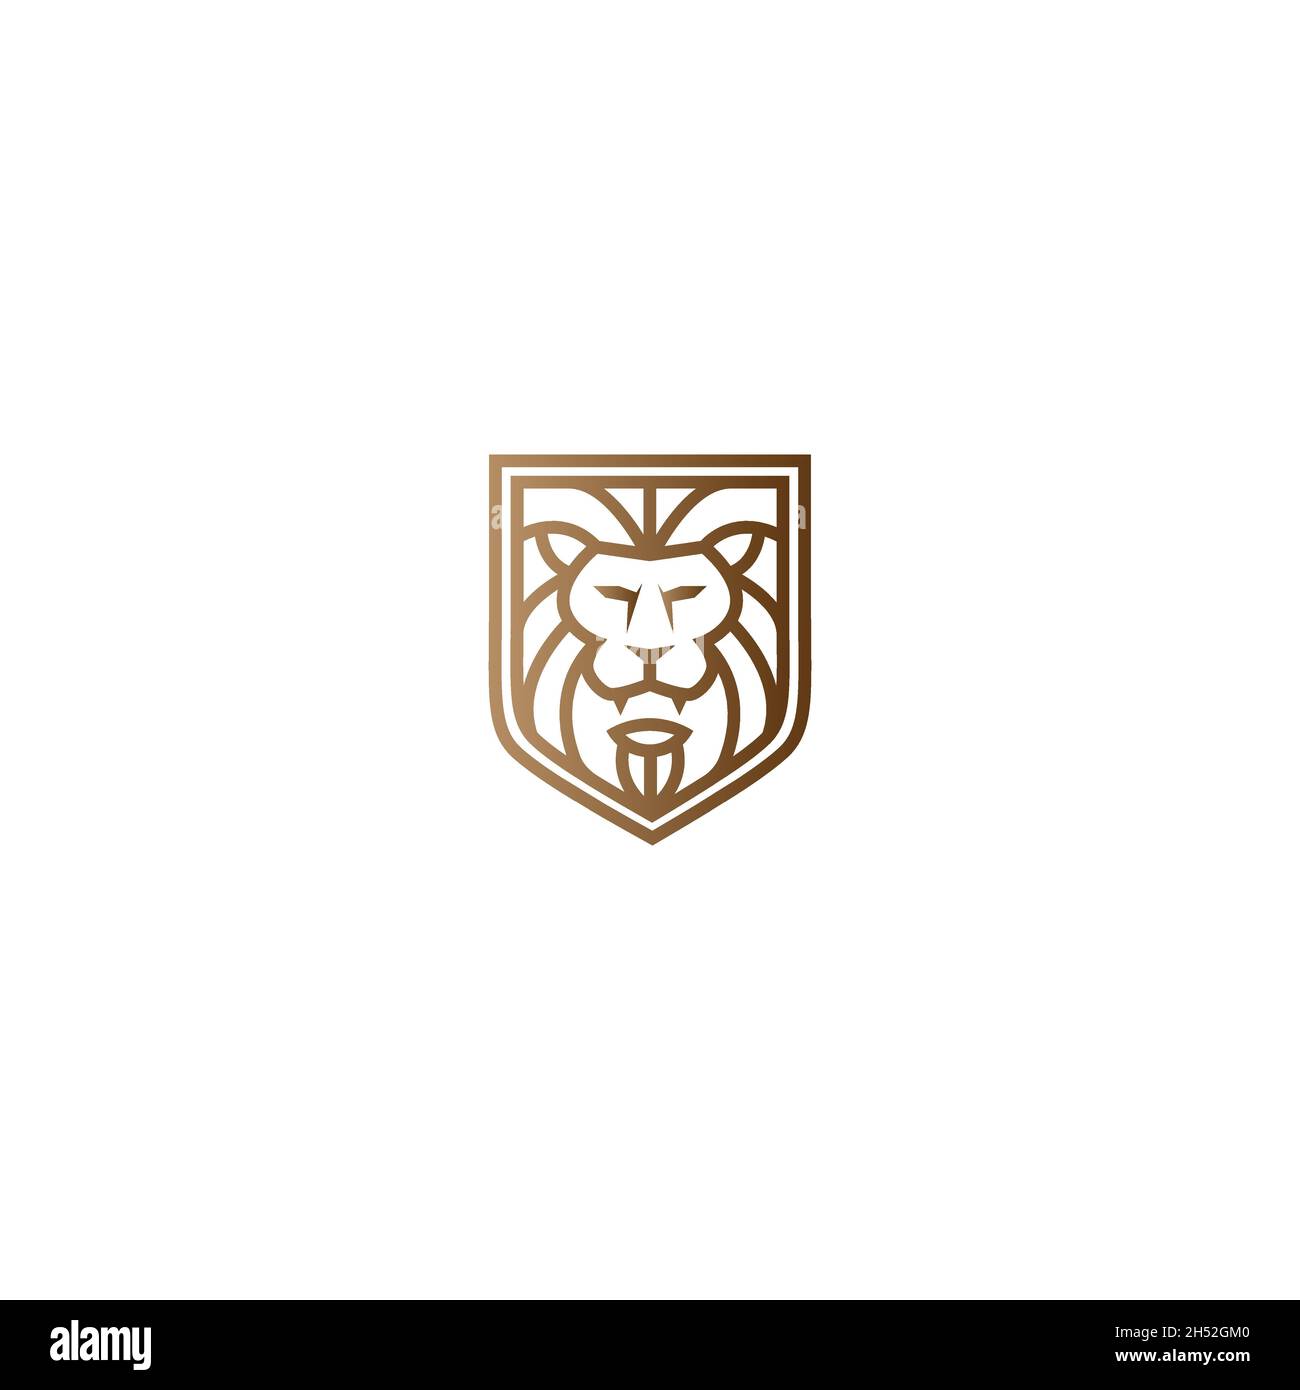 vector illustrations. logo shaped like lion head shield with key biting. Stock Vector